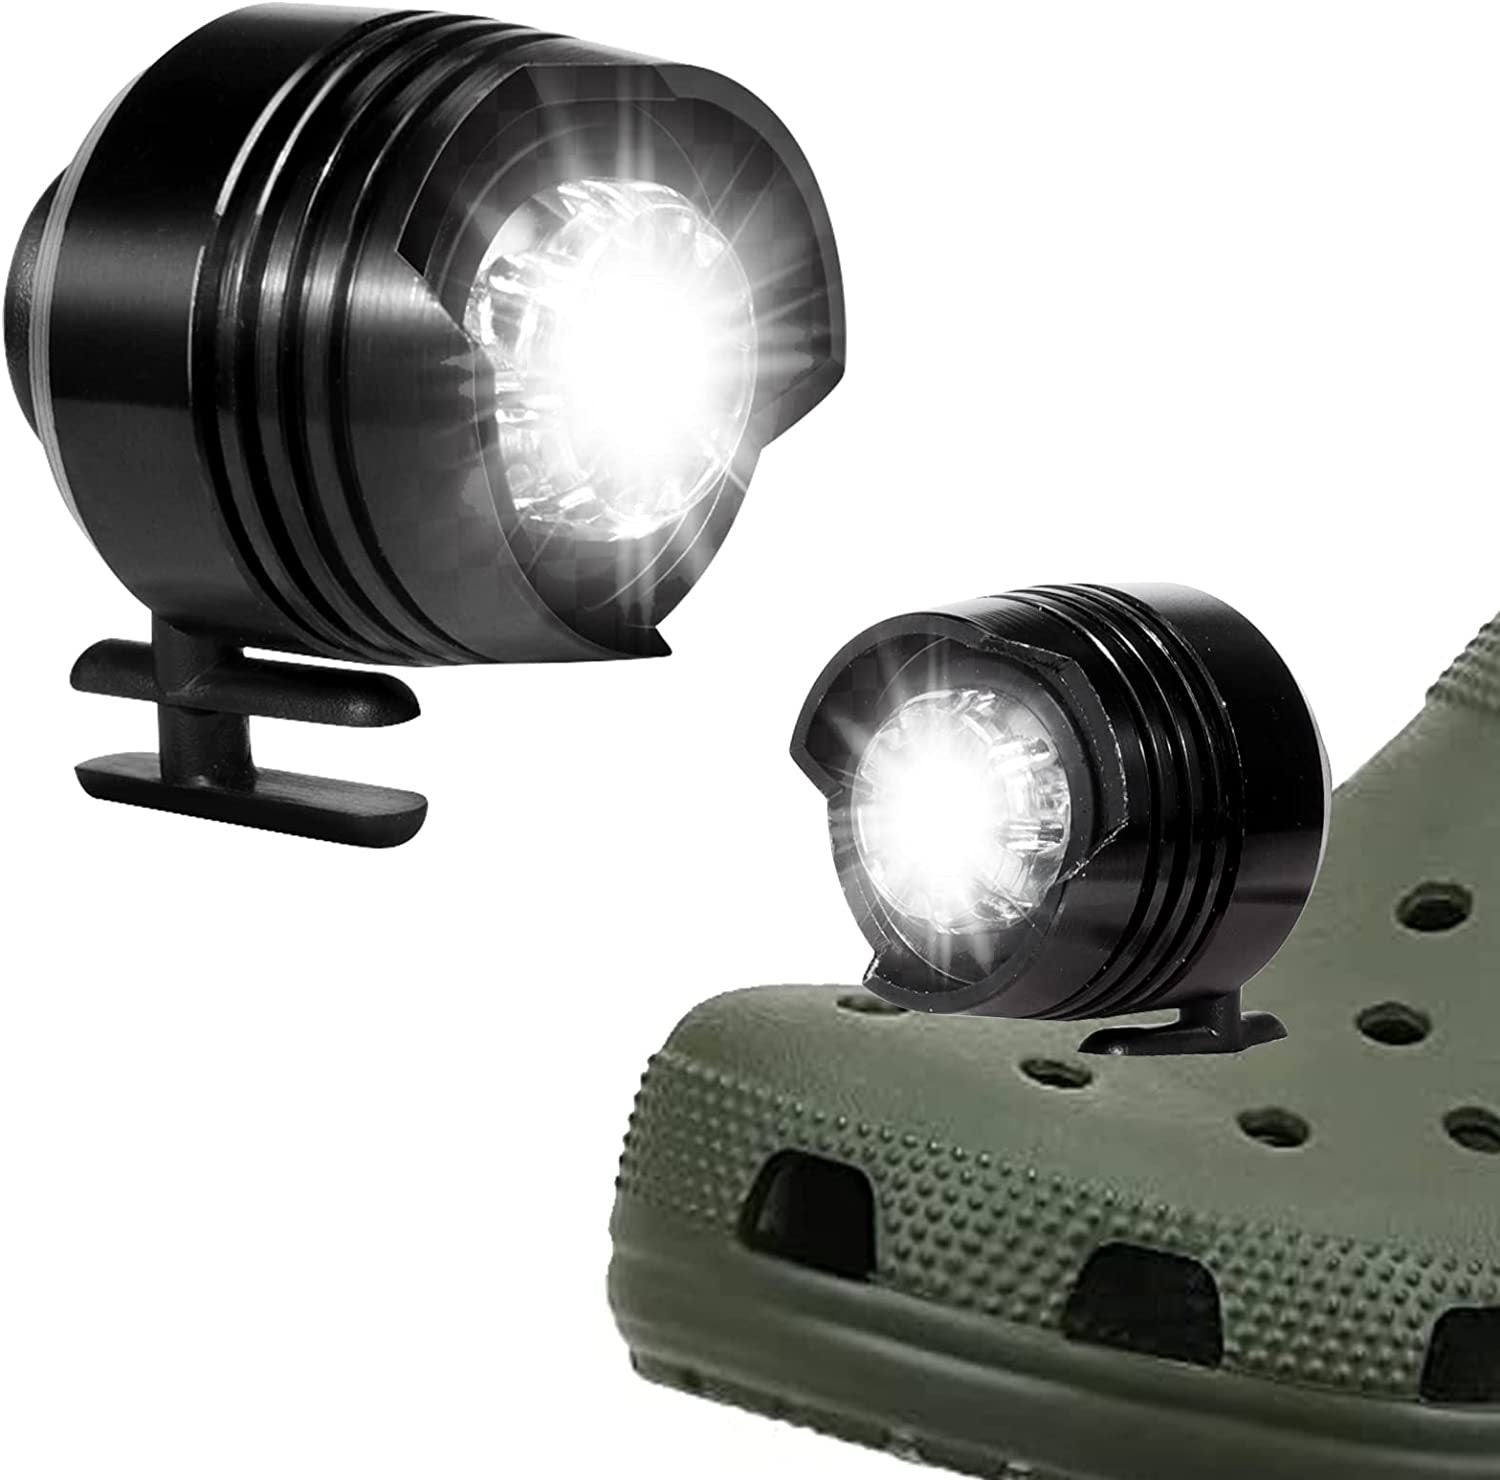 LED Headlights For Holes Shoes IPX5 Waterproof Shoes Light 3 Modes 72 Hours Glowing Small Lights For Dog Walking Camping Outdoor Emporium Discounts 5 Daily Products Discounts